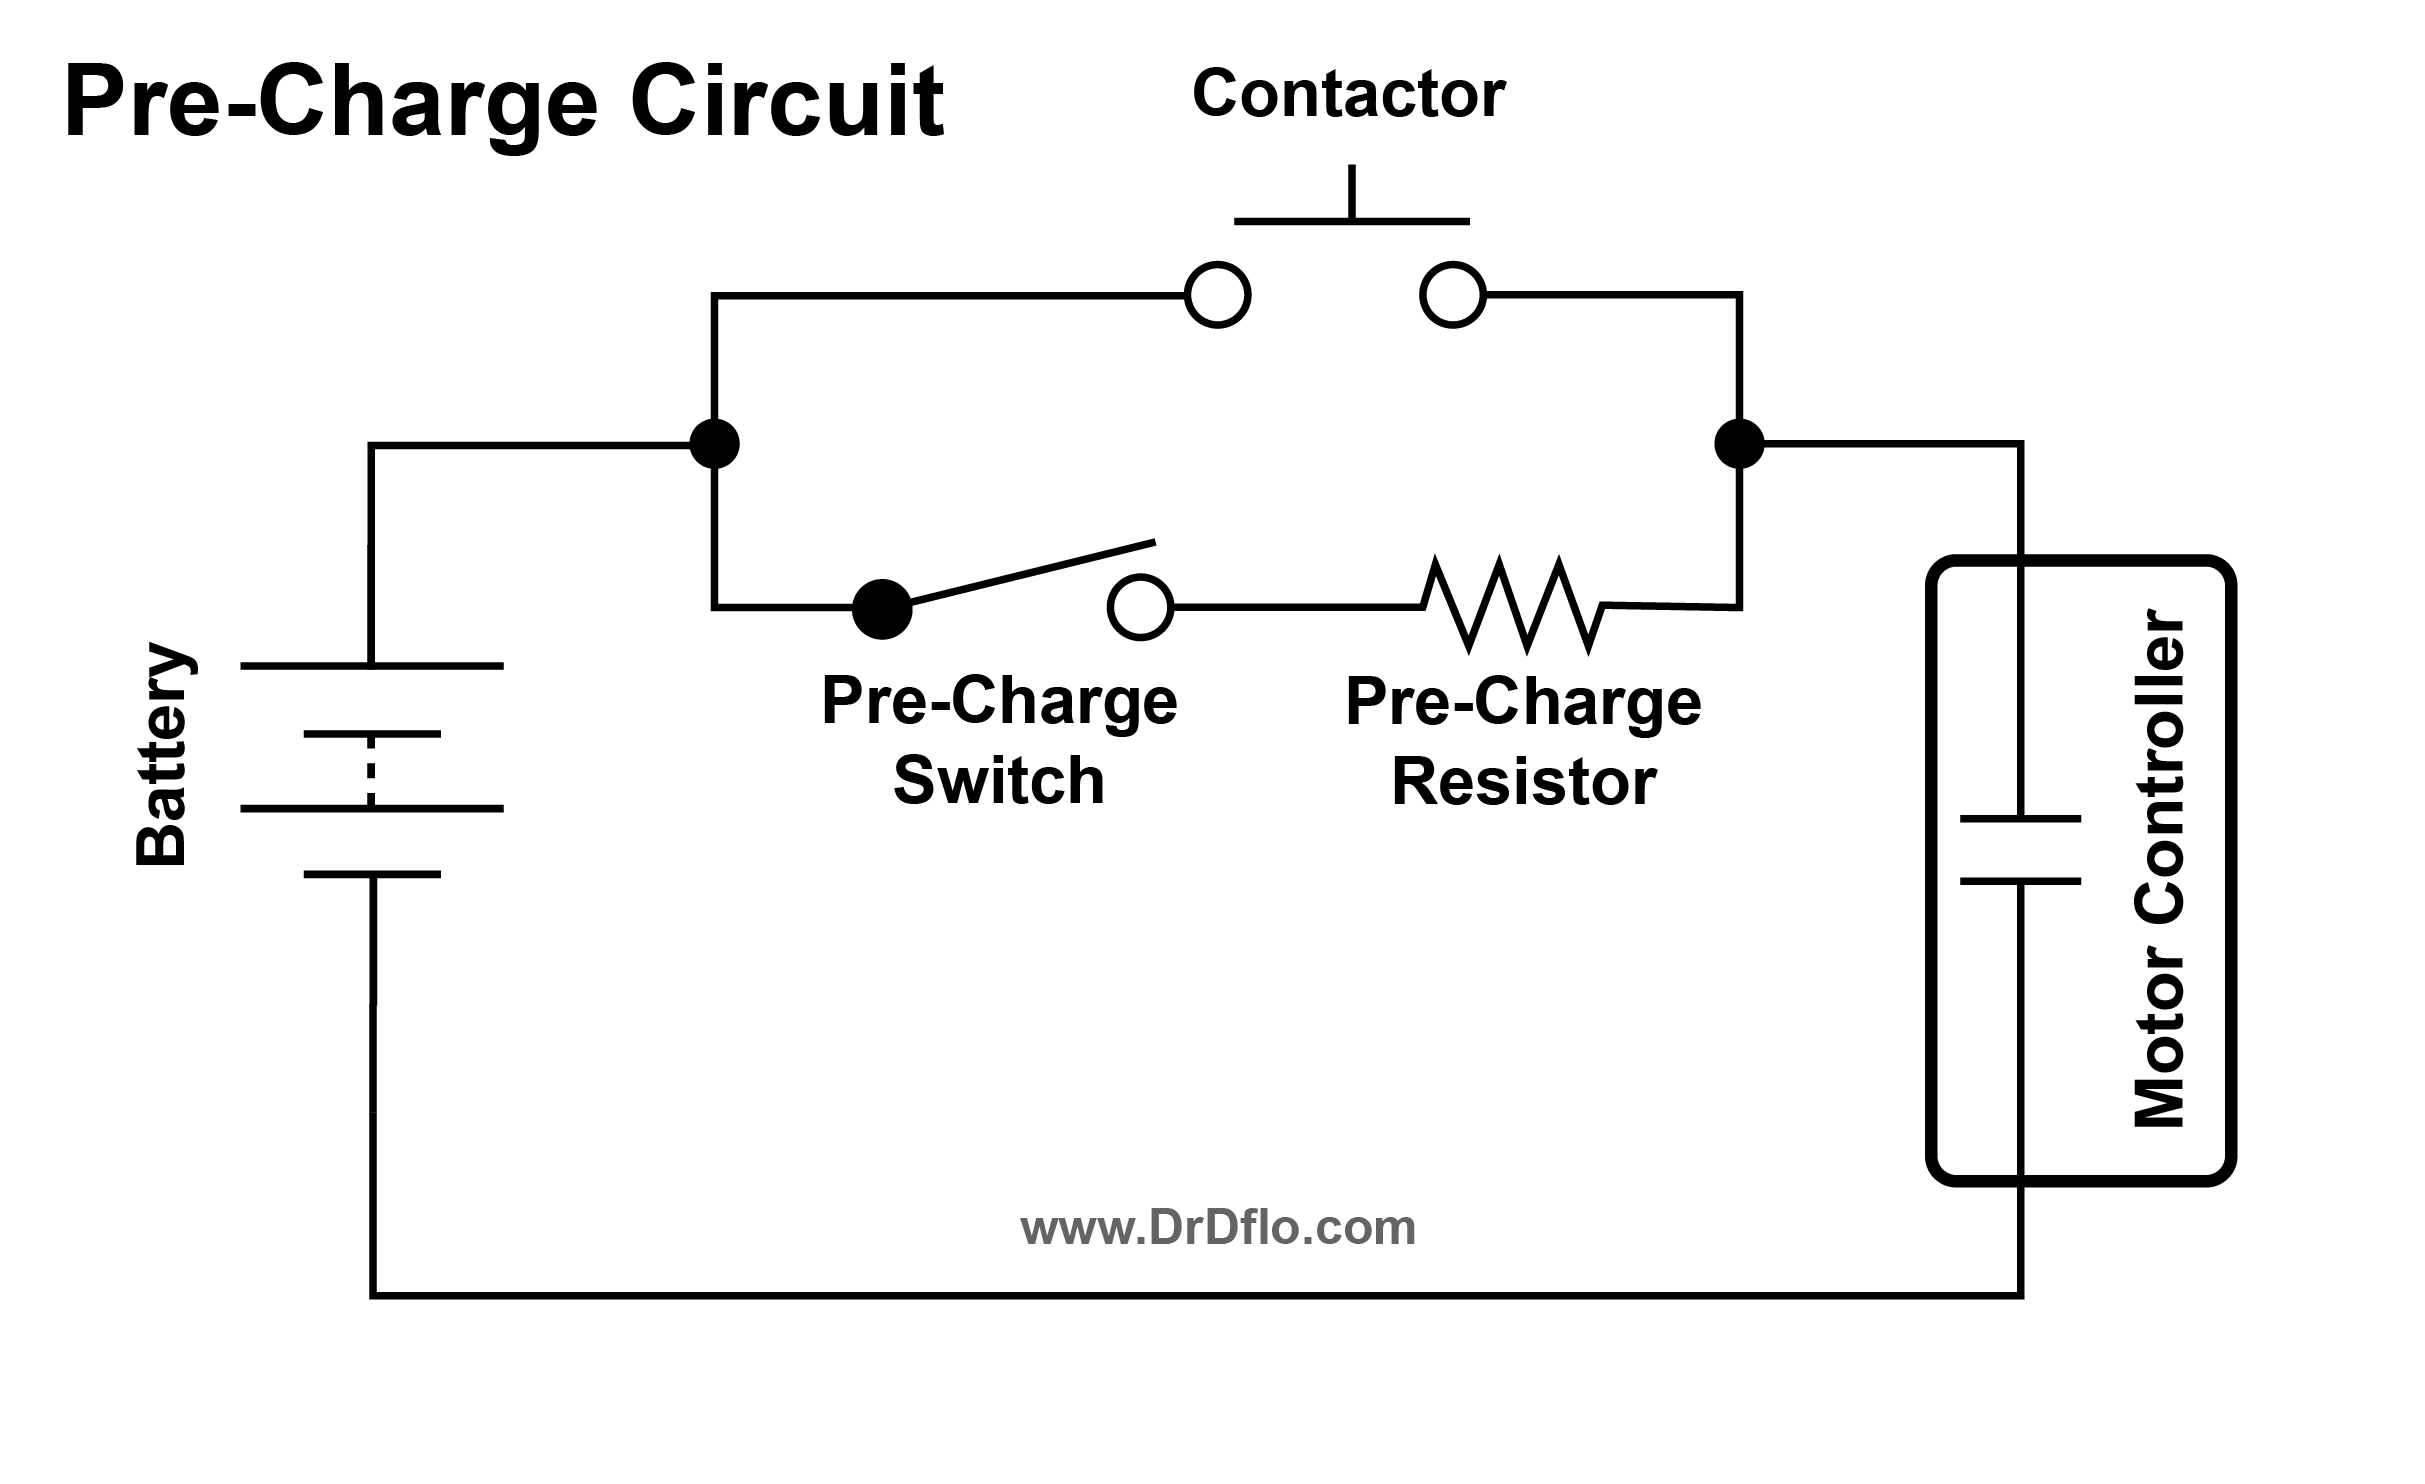 Diagram for a pre-charge circuit that will protect a motor controller when the battery is first plugged in. 